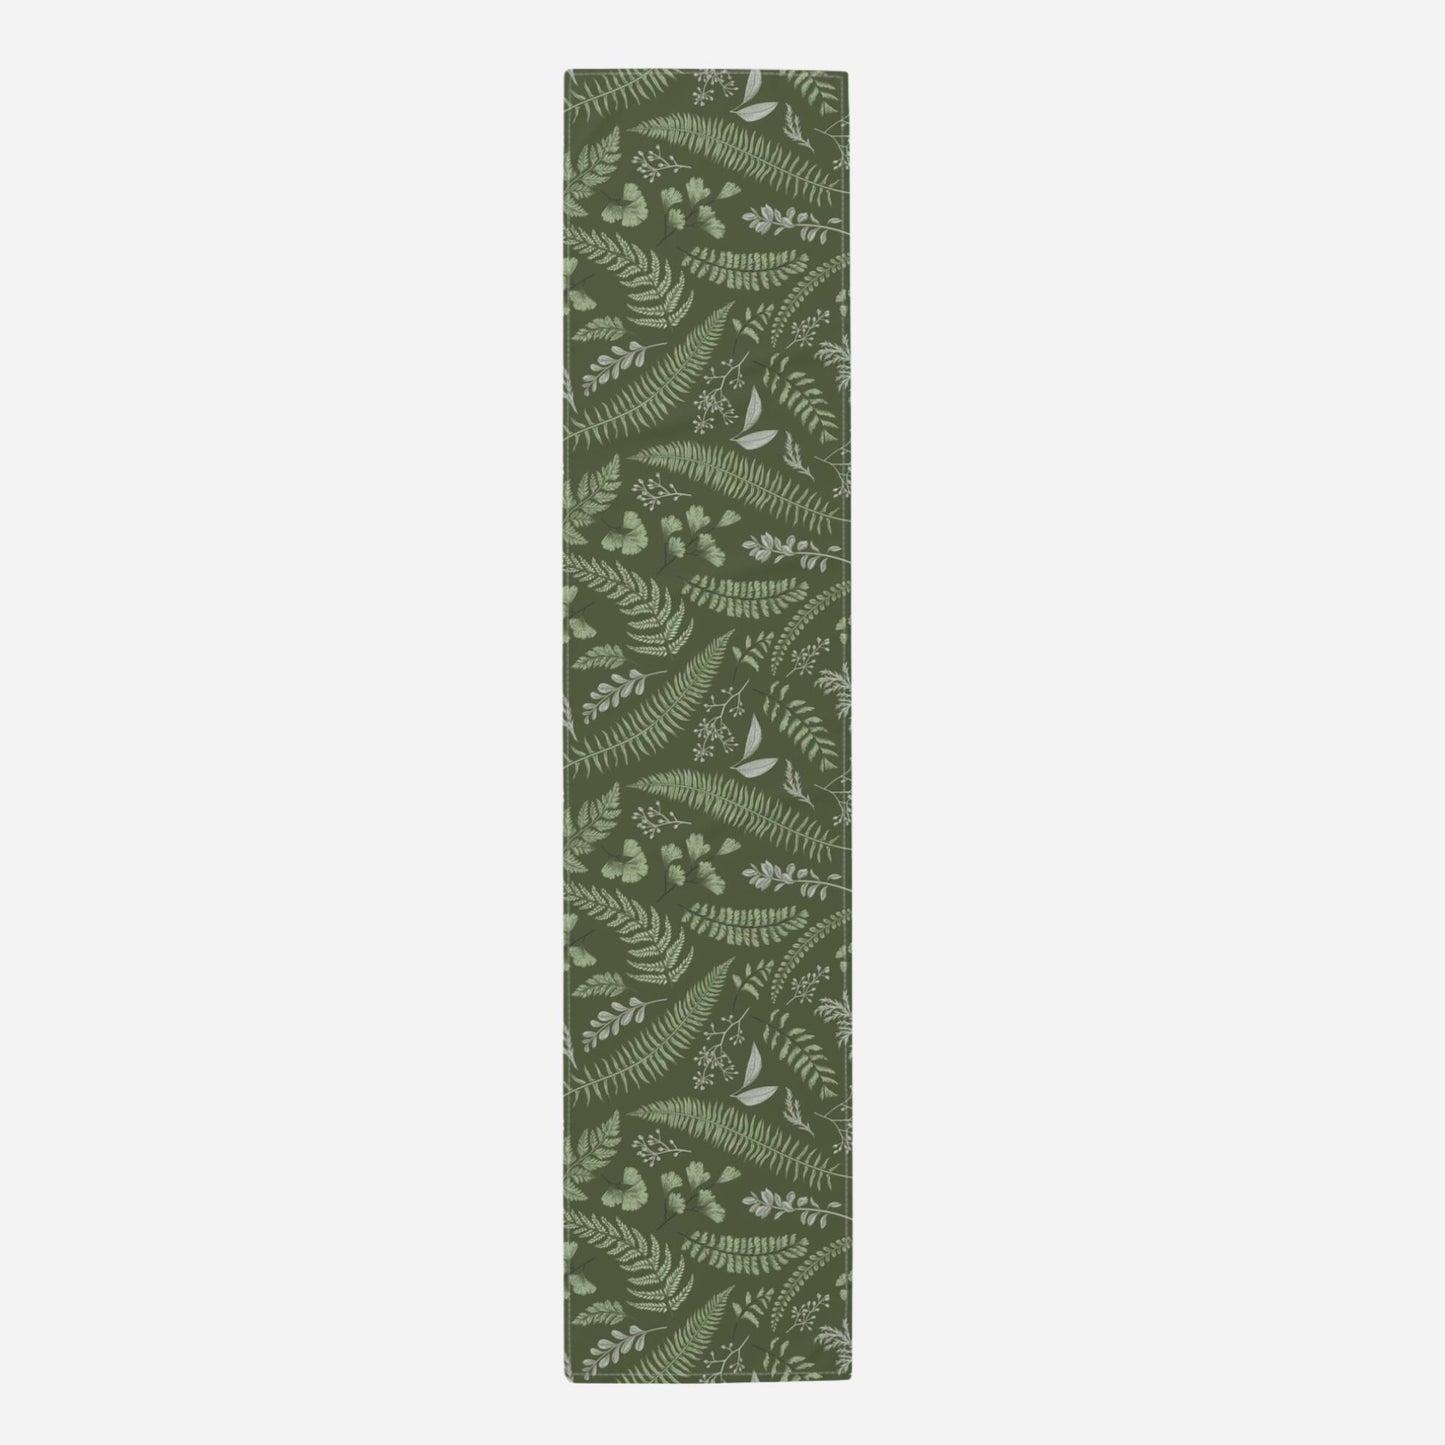 The table runner has a green background with an intricate fern and leaf pattern.